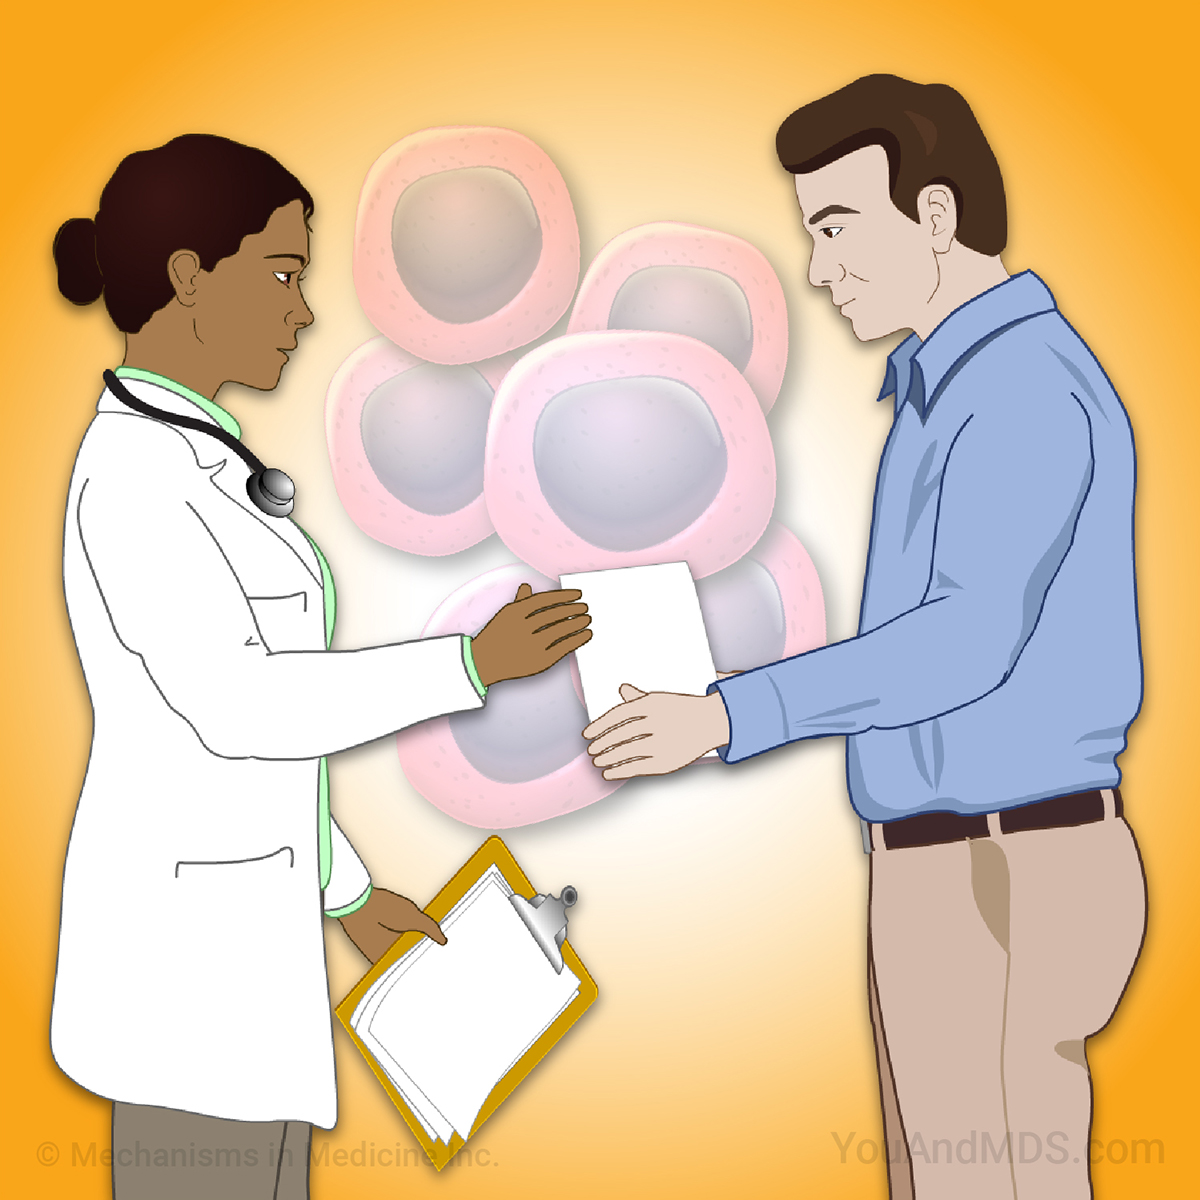 Learn about a variety of topics on Myelodysplastic Syndromes  through short animations.